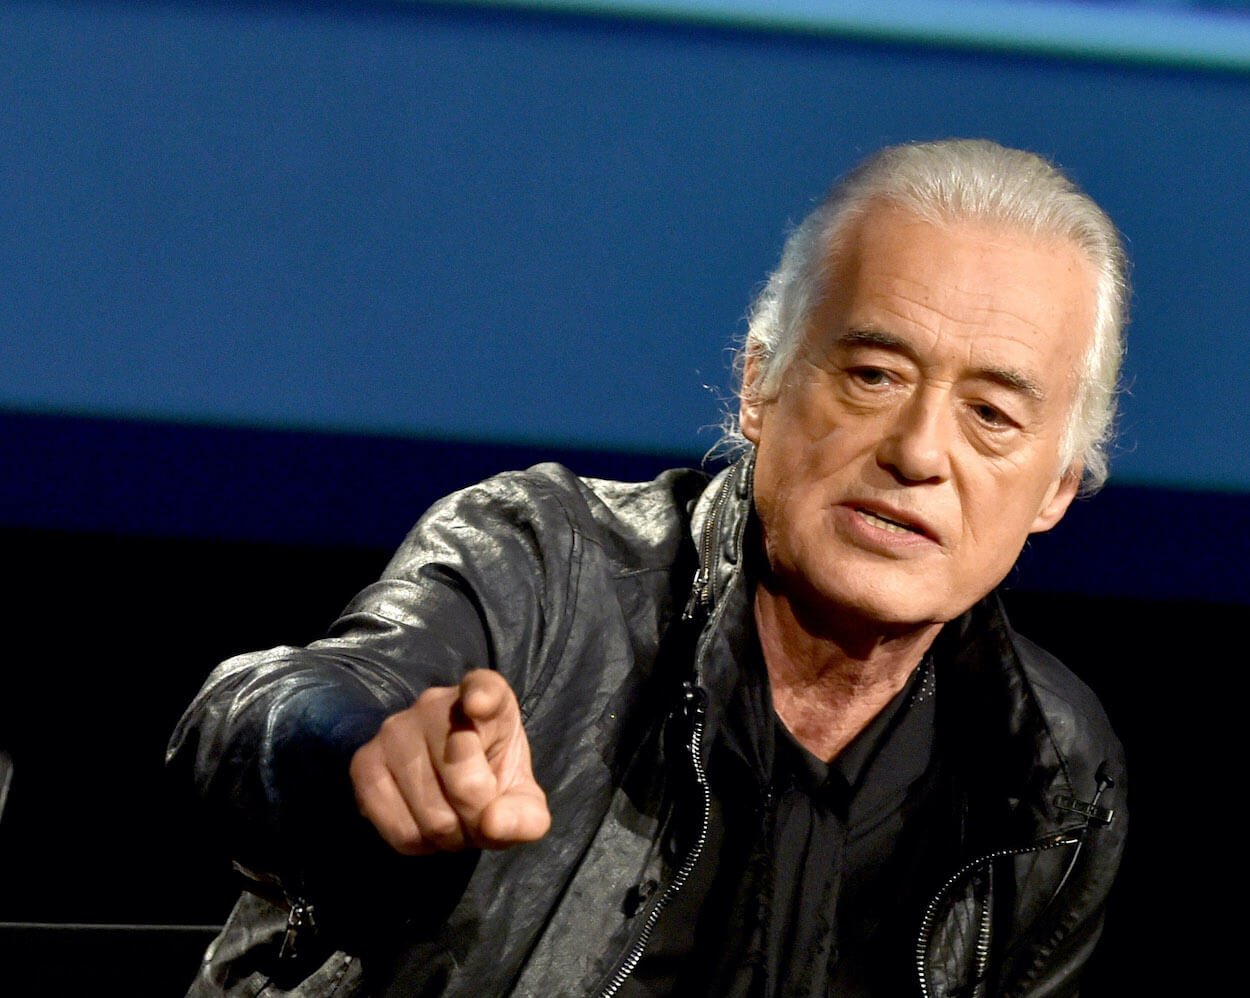 Led Zeppelin guitarist Jimmy Page wearing a leather jacket and pointing with his right hand during a 2014 appearance in Los Angeles.